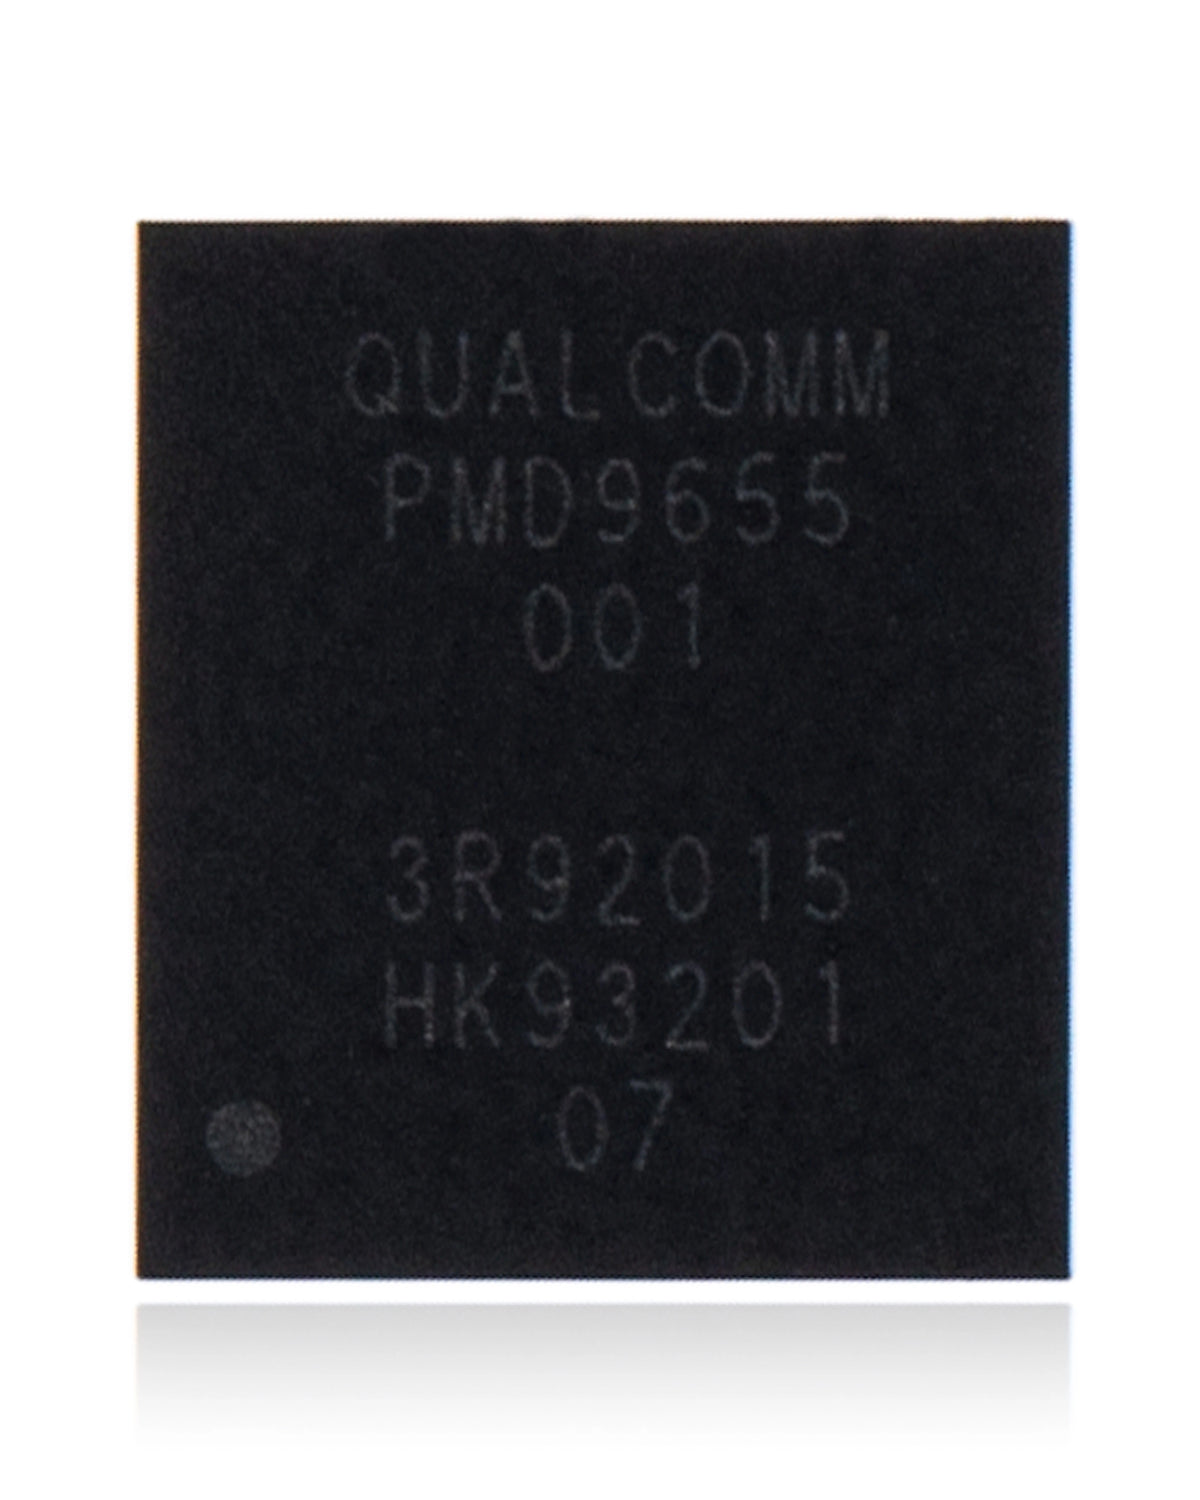 POWER IC (SMALL) COMPATIBLE WITH IPHONE 8 / 8 PLUS / X (PMD9655: QUALCOMM)